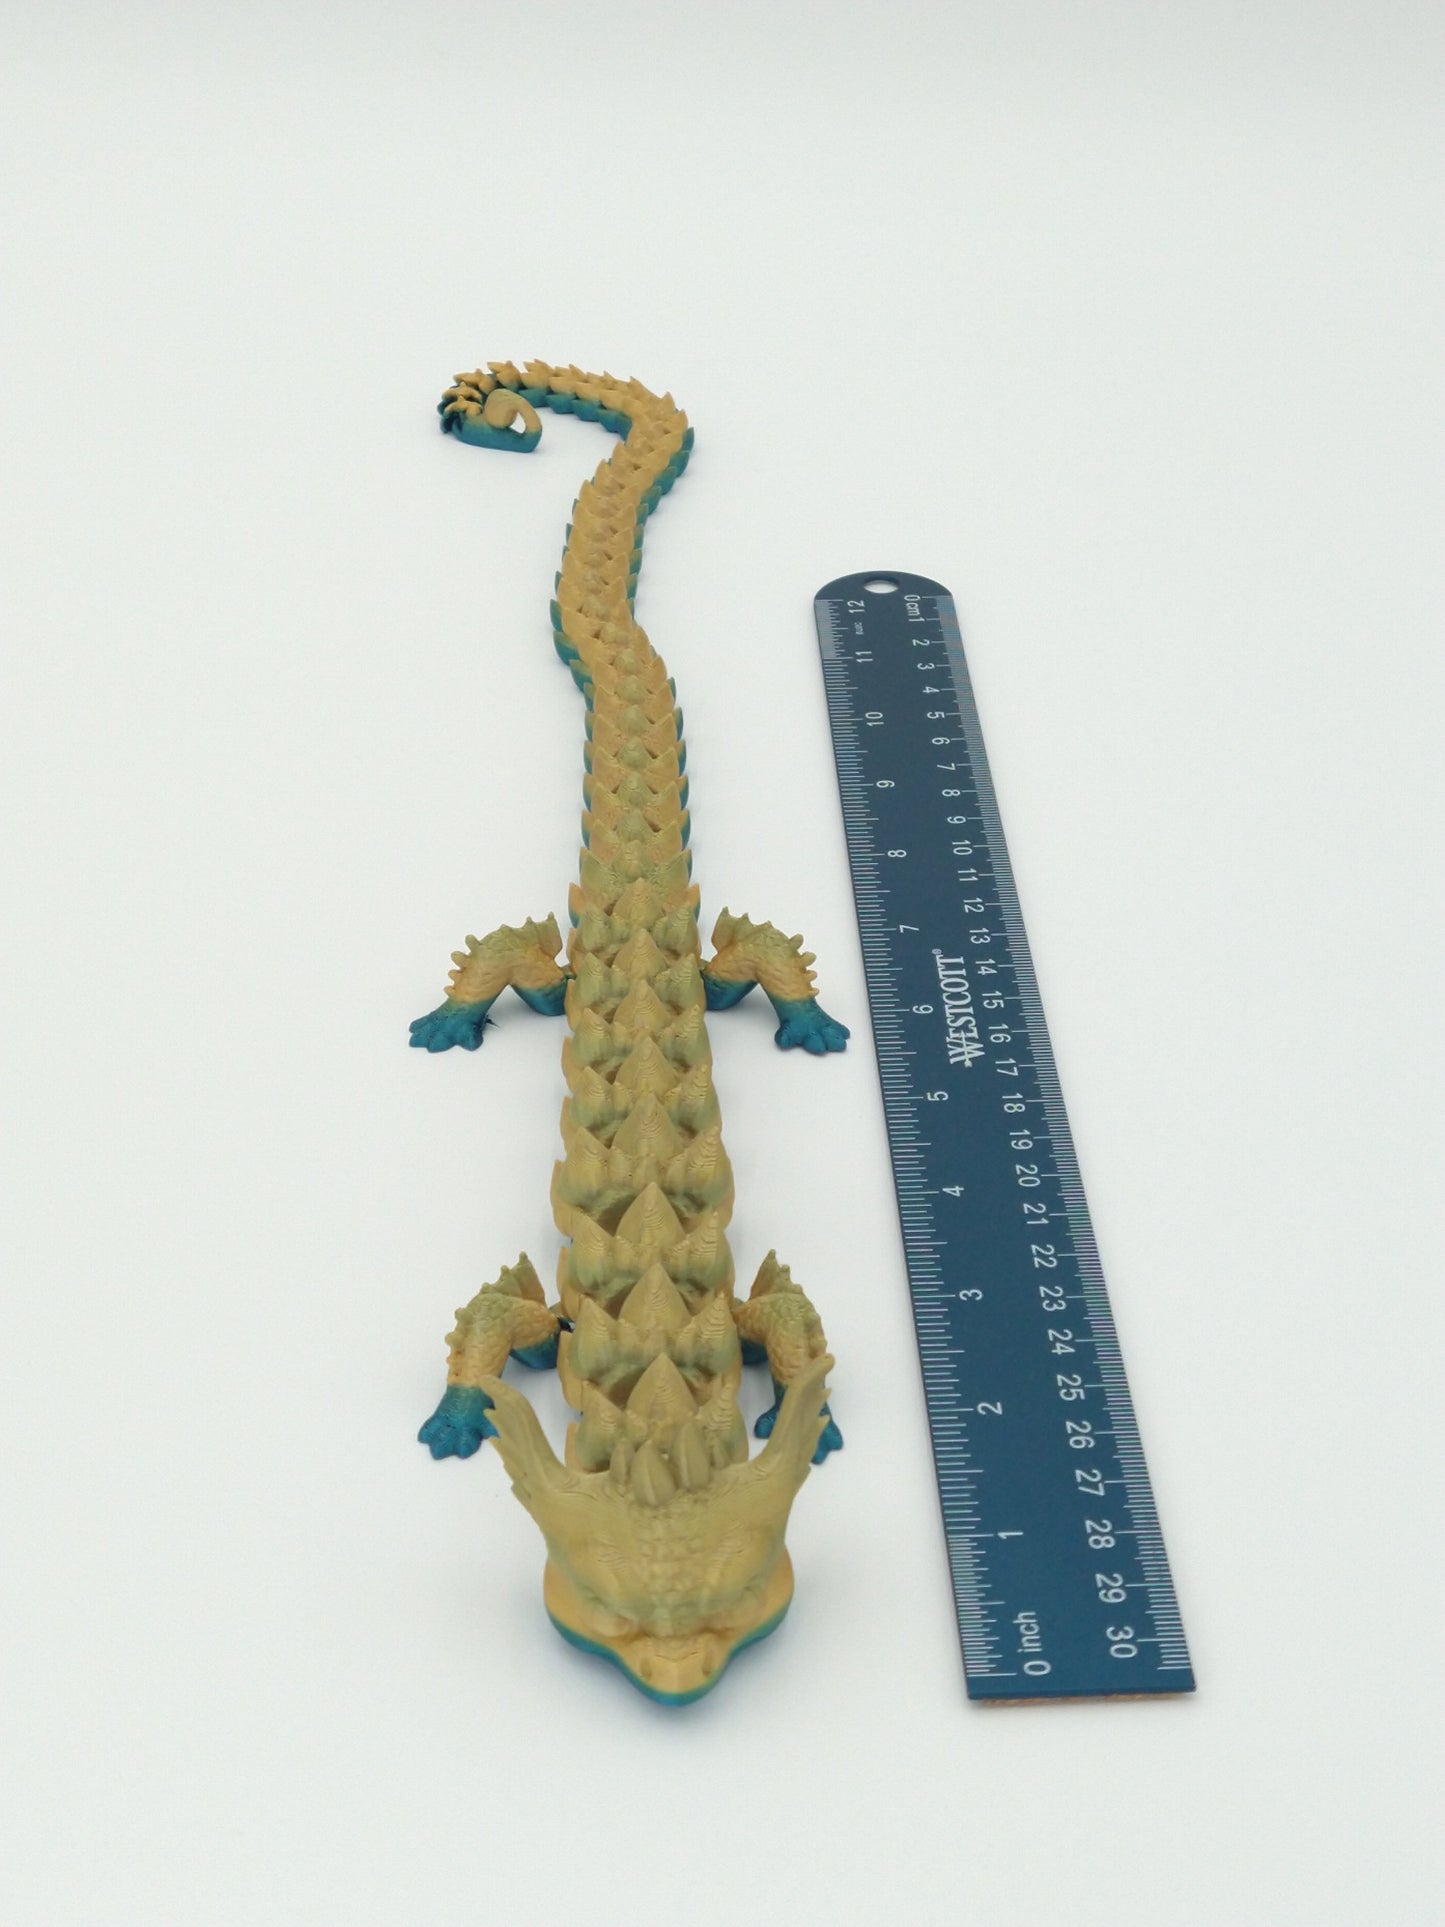 BILLY THE DRAGON Articulated Flexi Figure 3D Printed Metallic Rainbow 19"